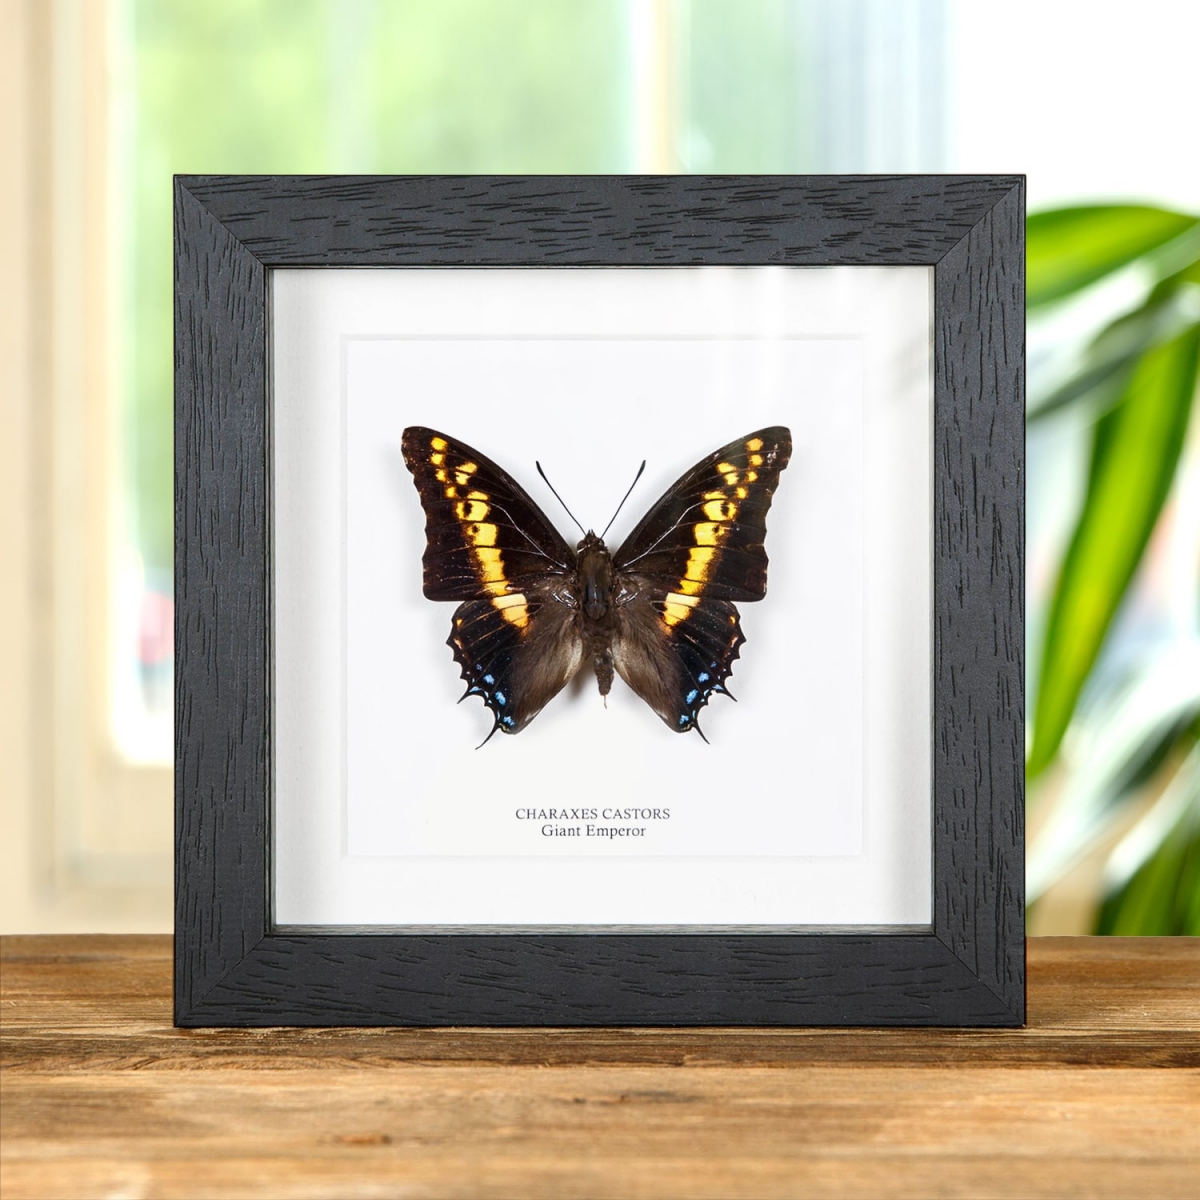 Minibeast Giant Emperor Butterfly In Box Frame (Charaxes castors)